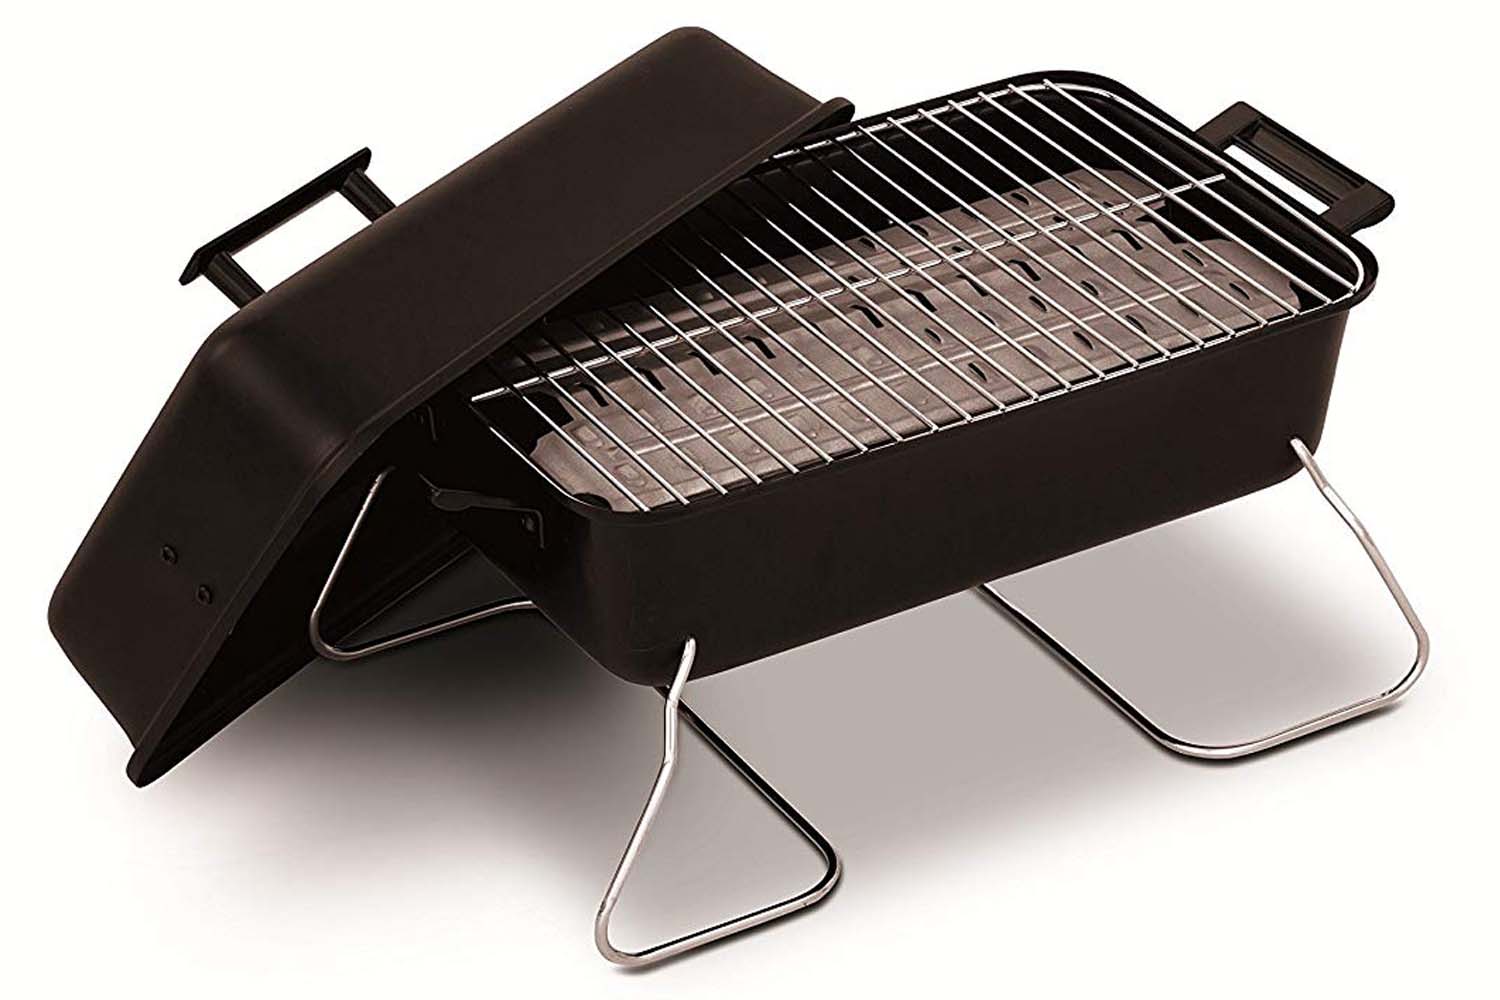 Char-Broil Portable Tabletop Charcoal Grill